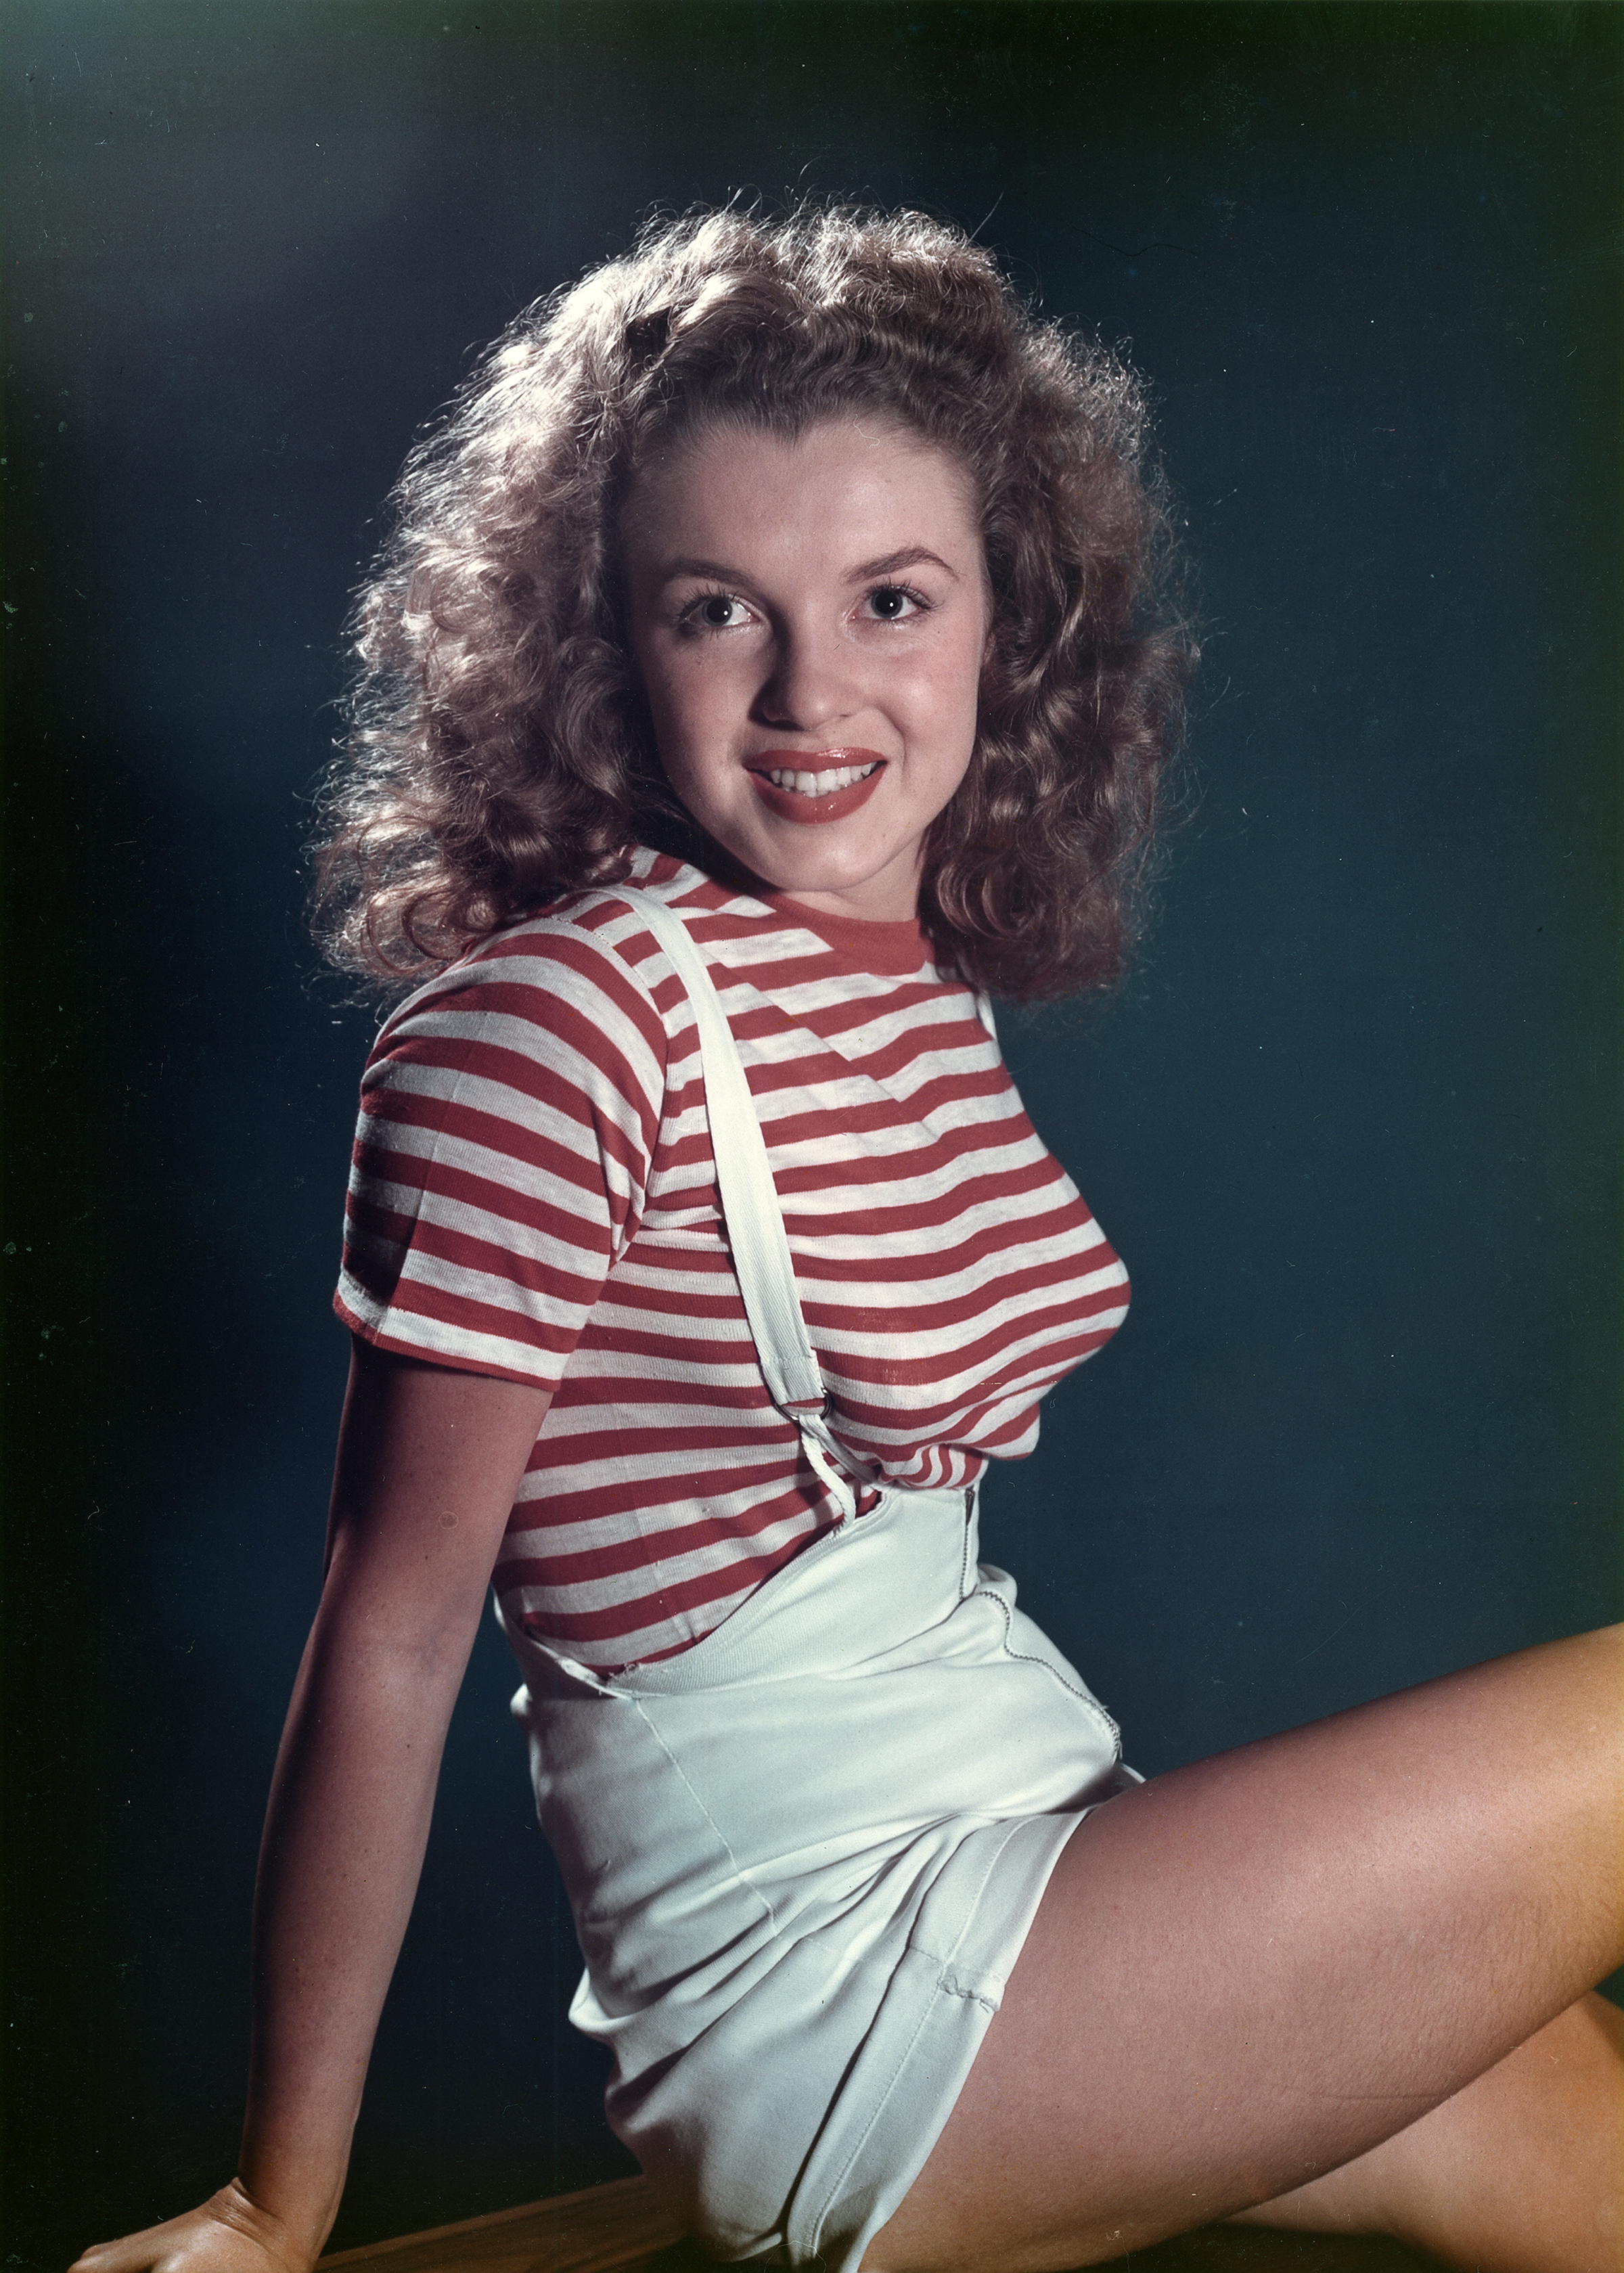 Marilyn Monroe poses for a portrait in 1947 | Source: Getty Images